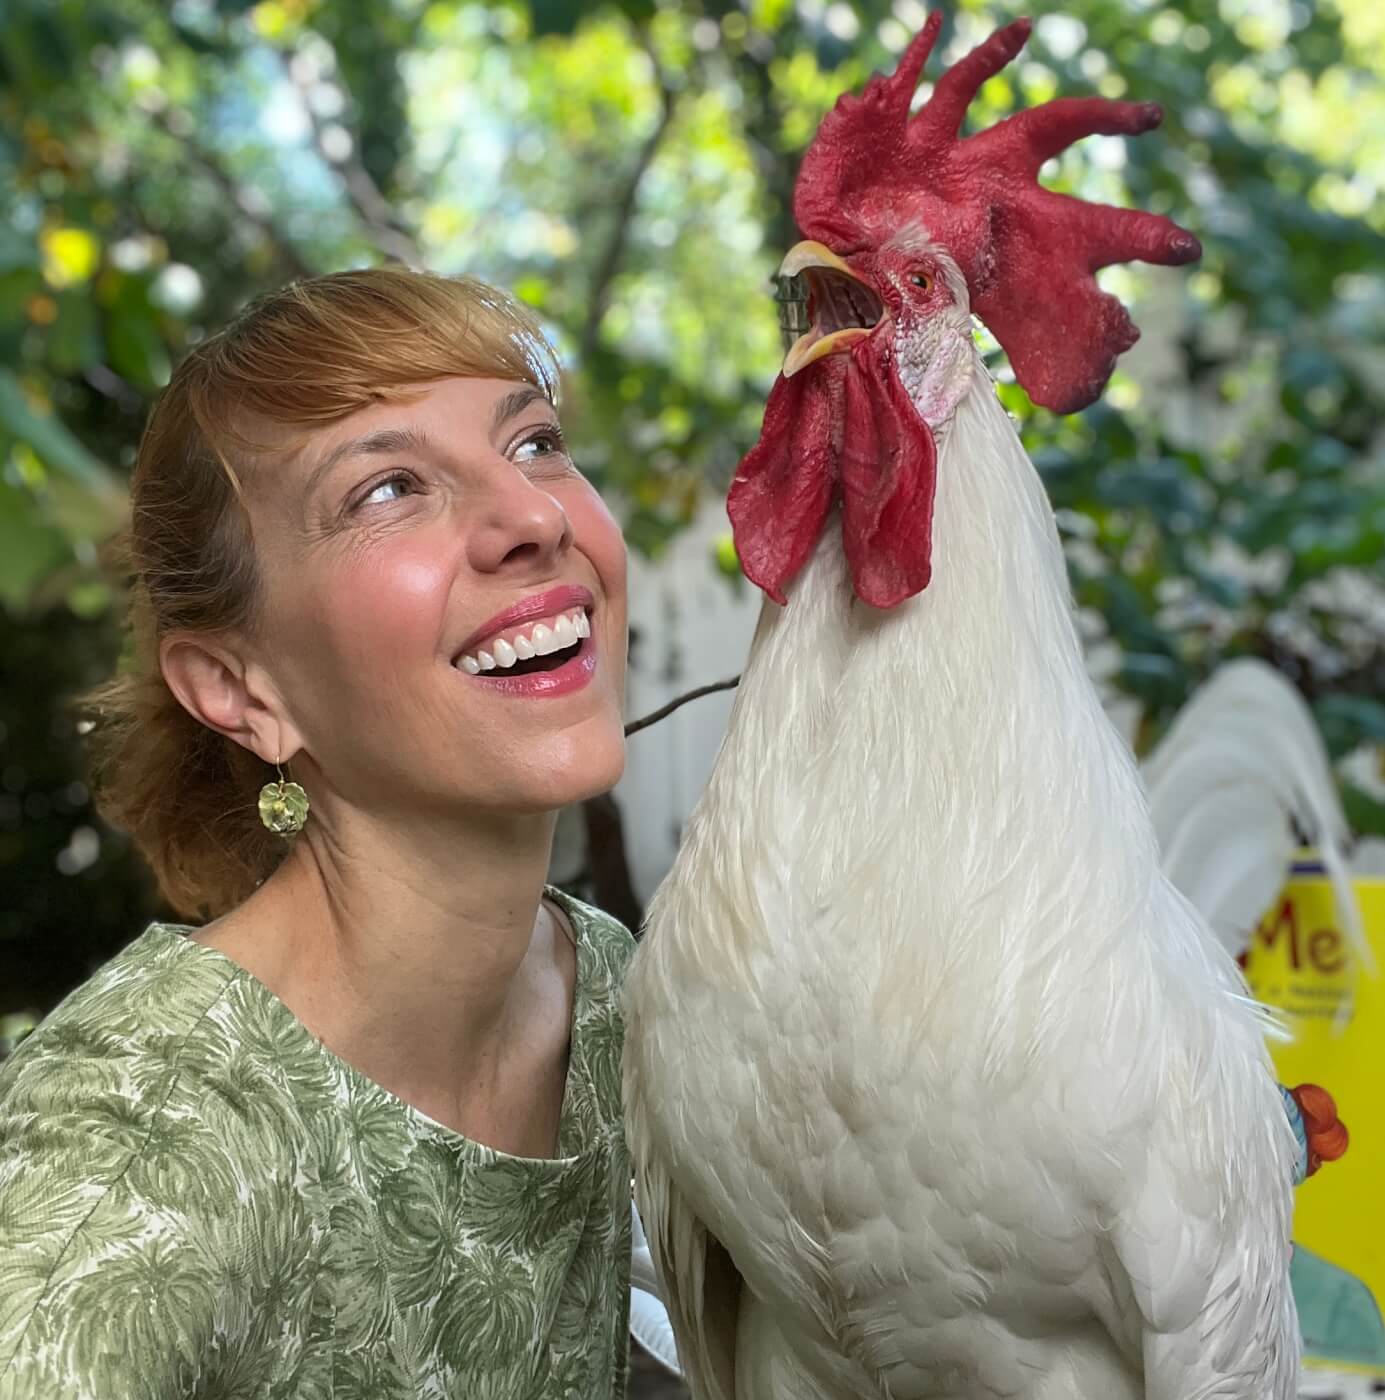 Camille and her rooster Bree cuddled up together outside. 